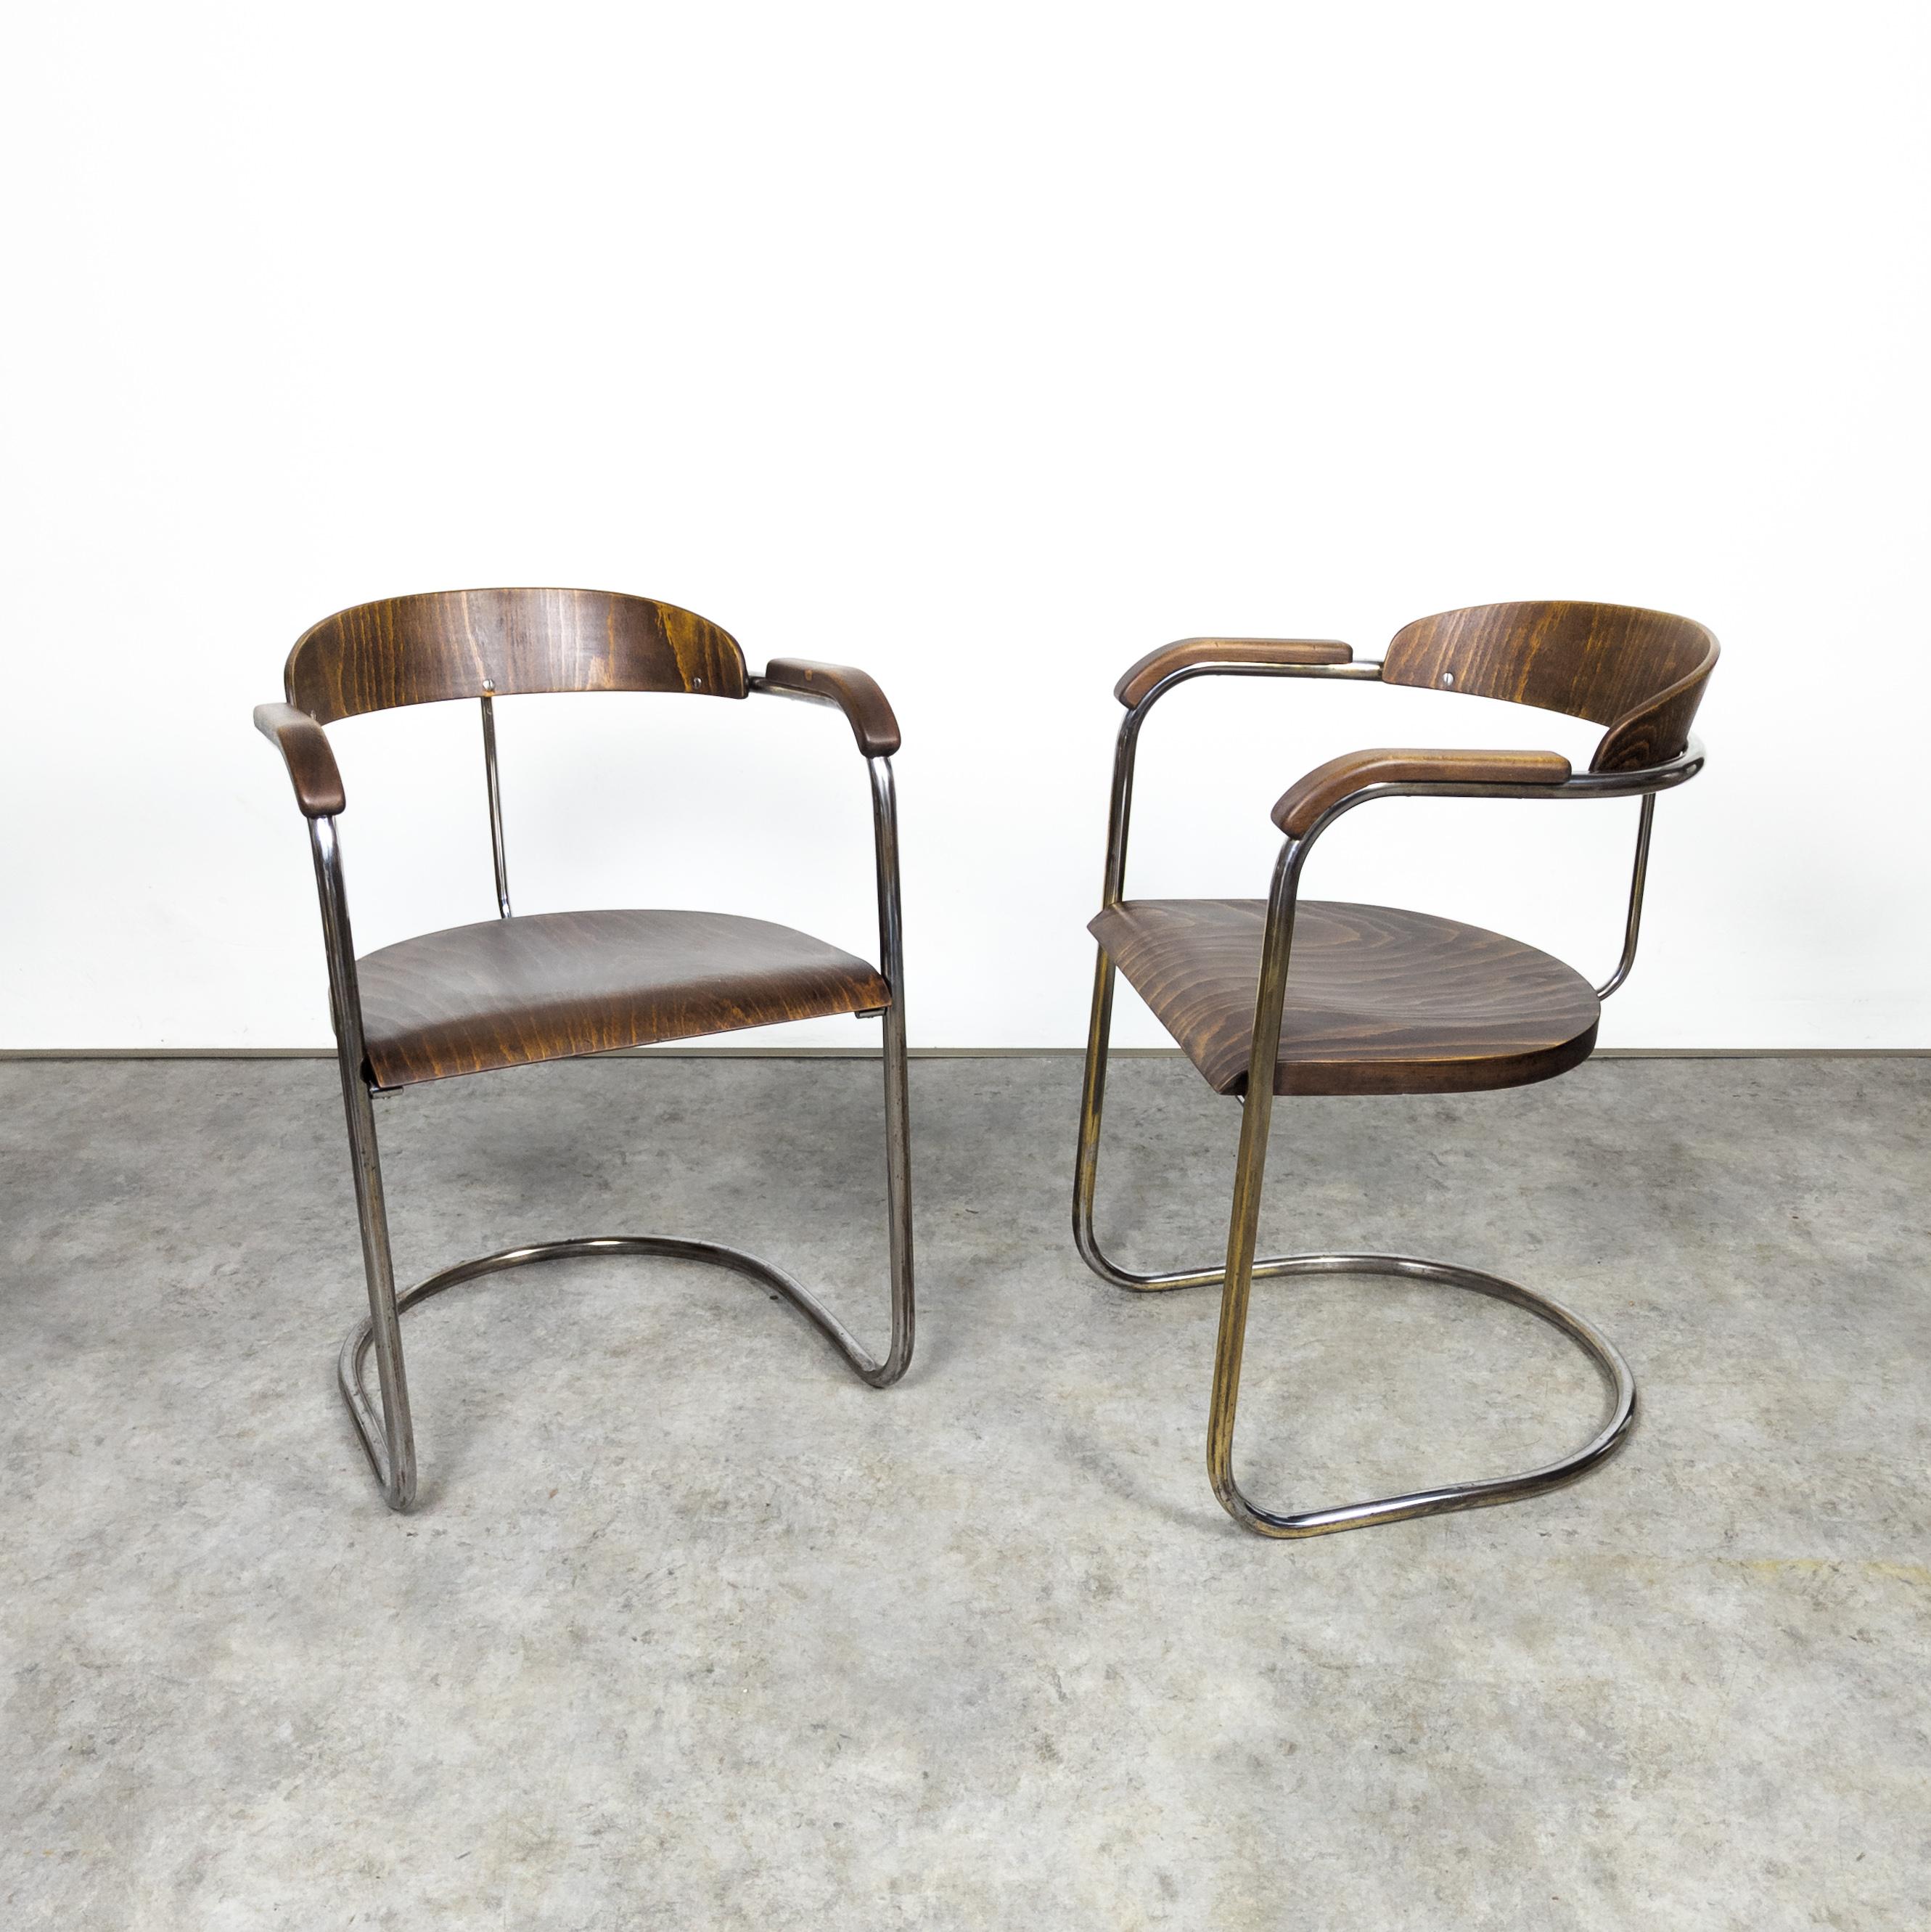 Bauhaus Rare Hans and Wassily Luckhardt SS 33 armchairs variant  For Sale